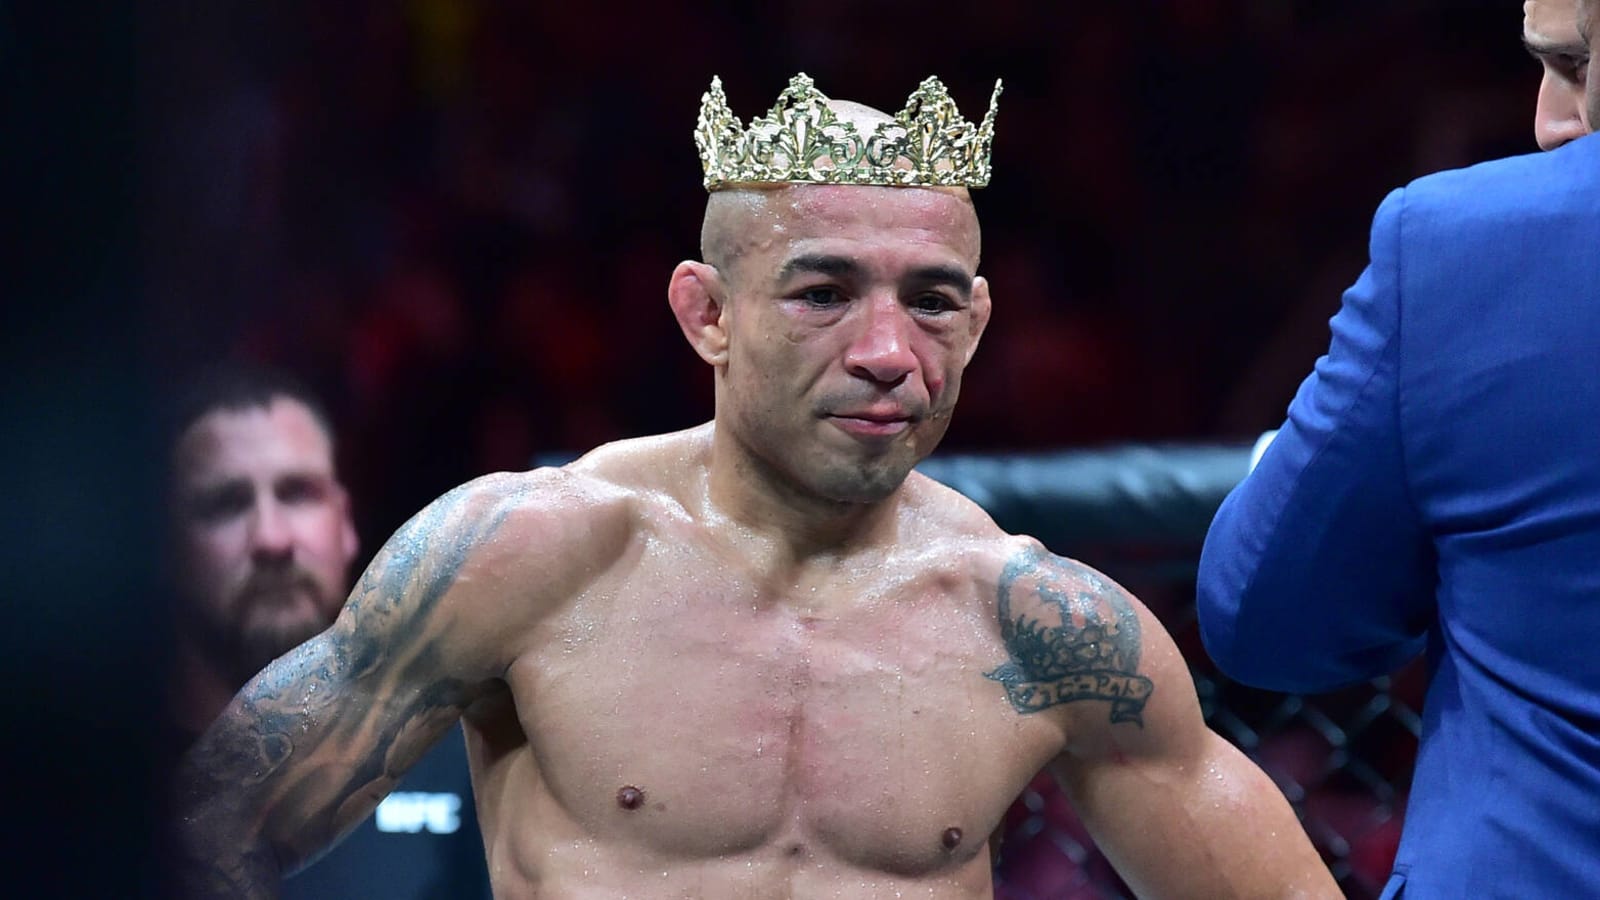 ‘King of Rio’ Jose Aldo inches closer to bantamweight title by securing Top 10 spot after return win